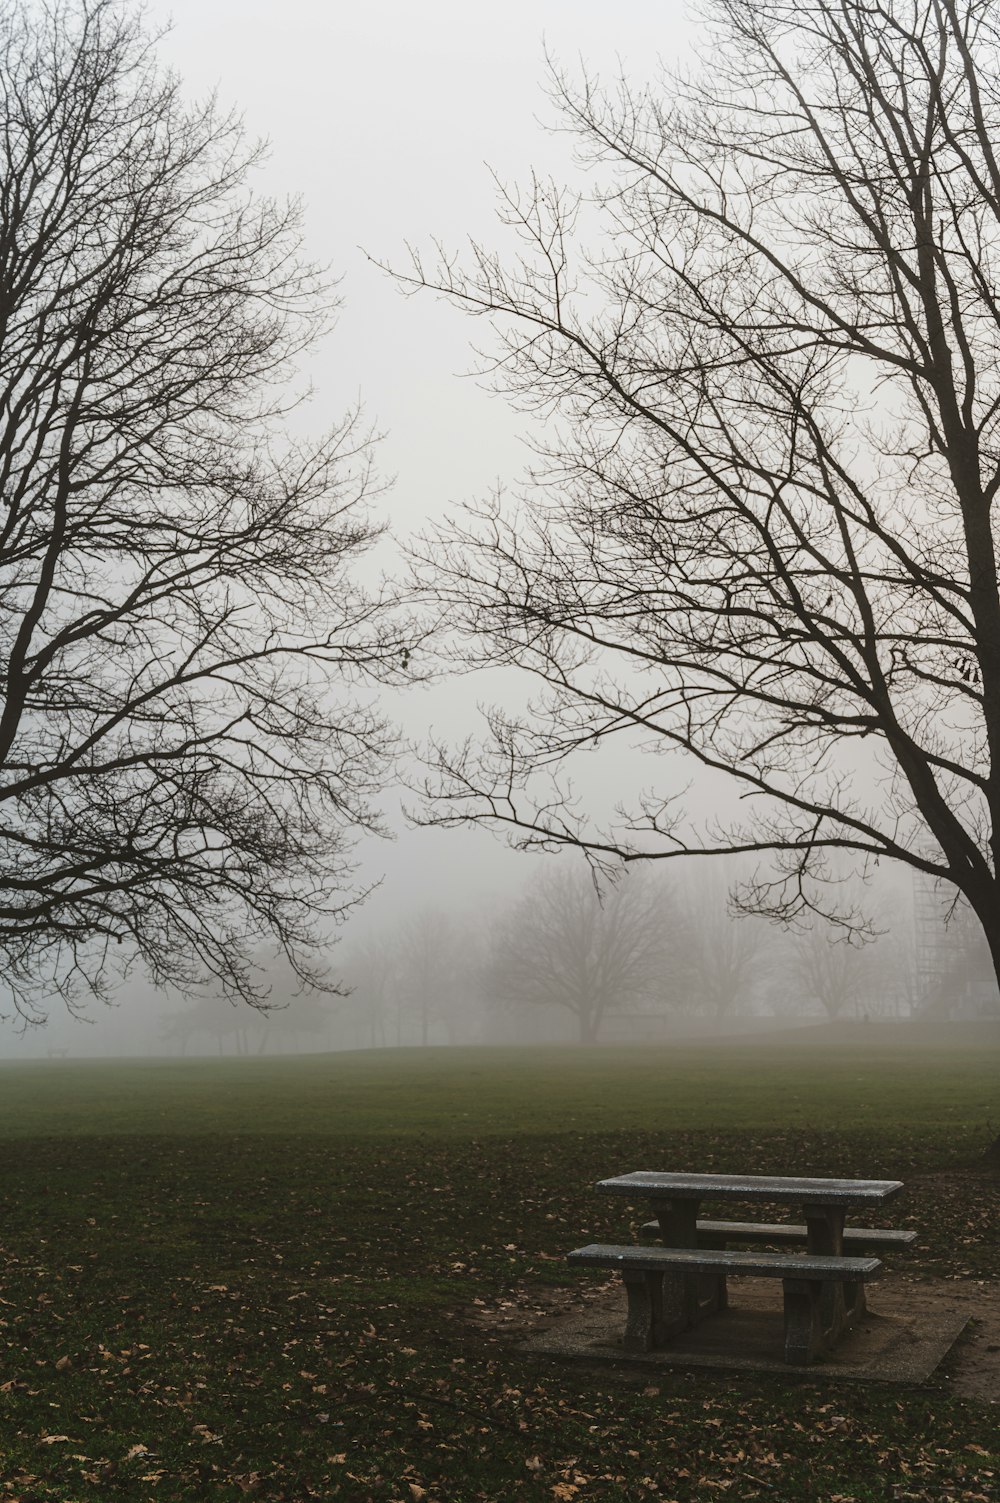 bare trees on green grass field during foggy weather